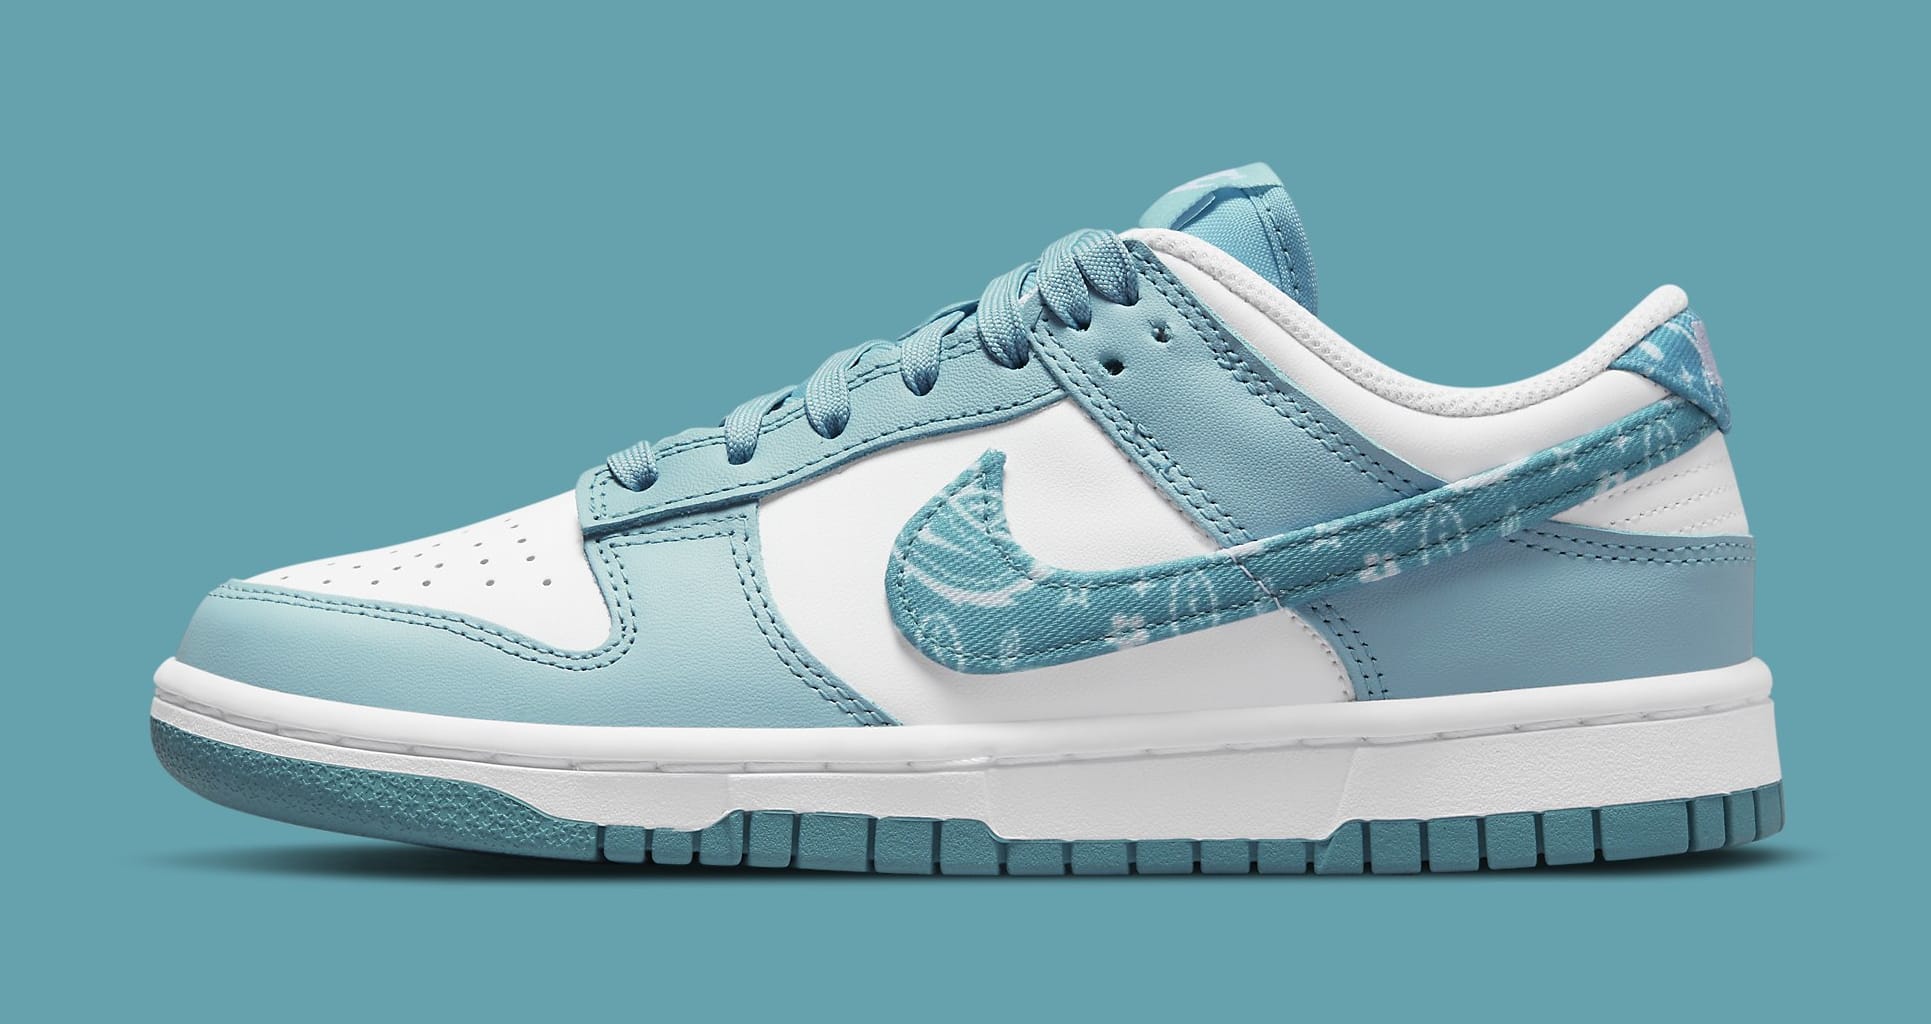 Nike Dunk Low 'Paisley Teal' DH4401 101 Lateral